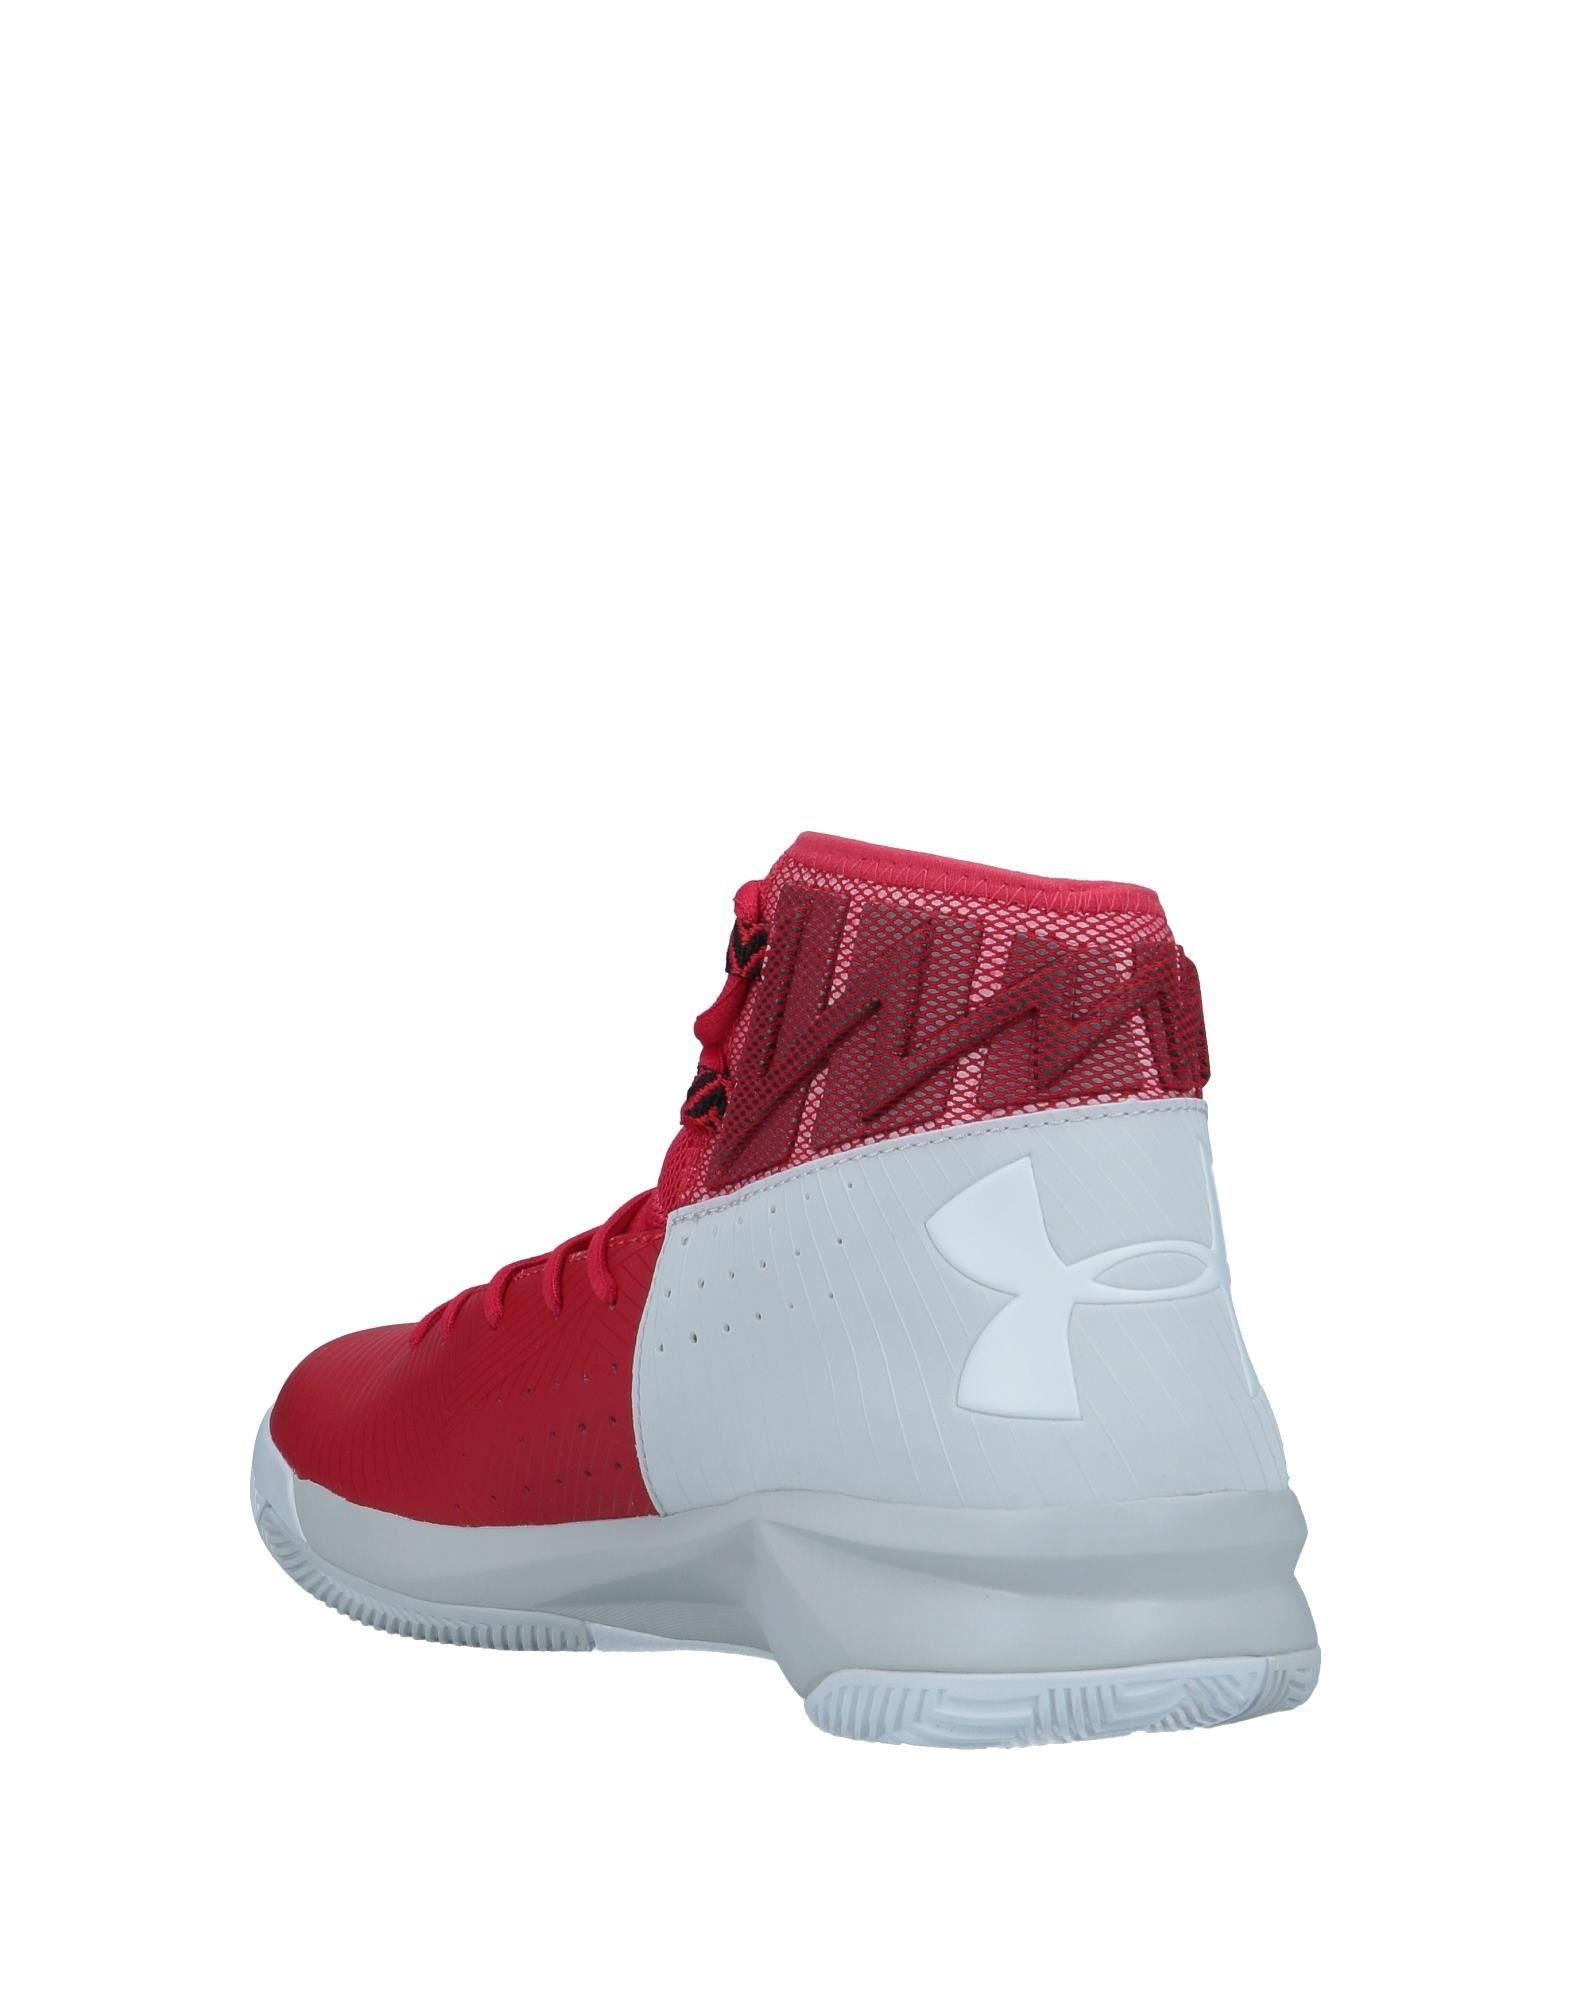 red under armour shoes high tops